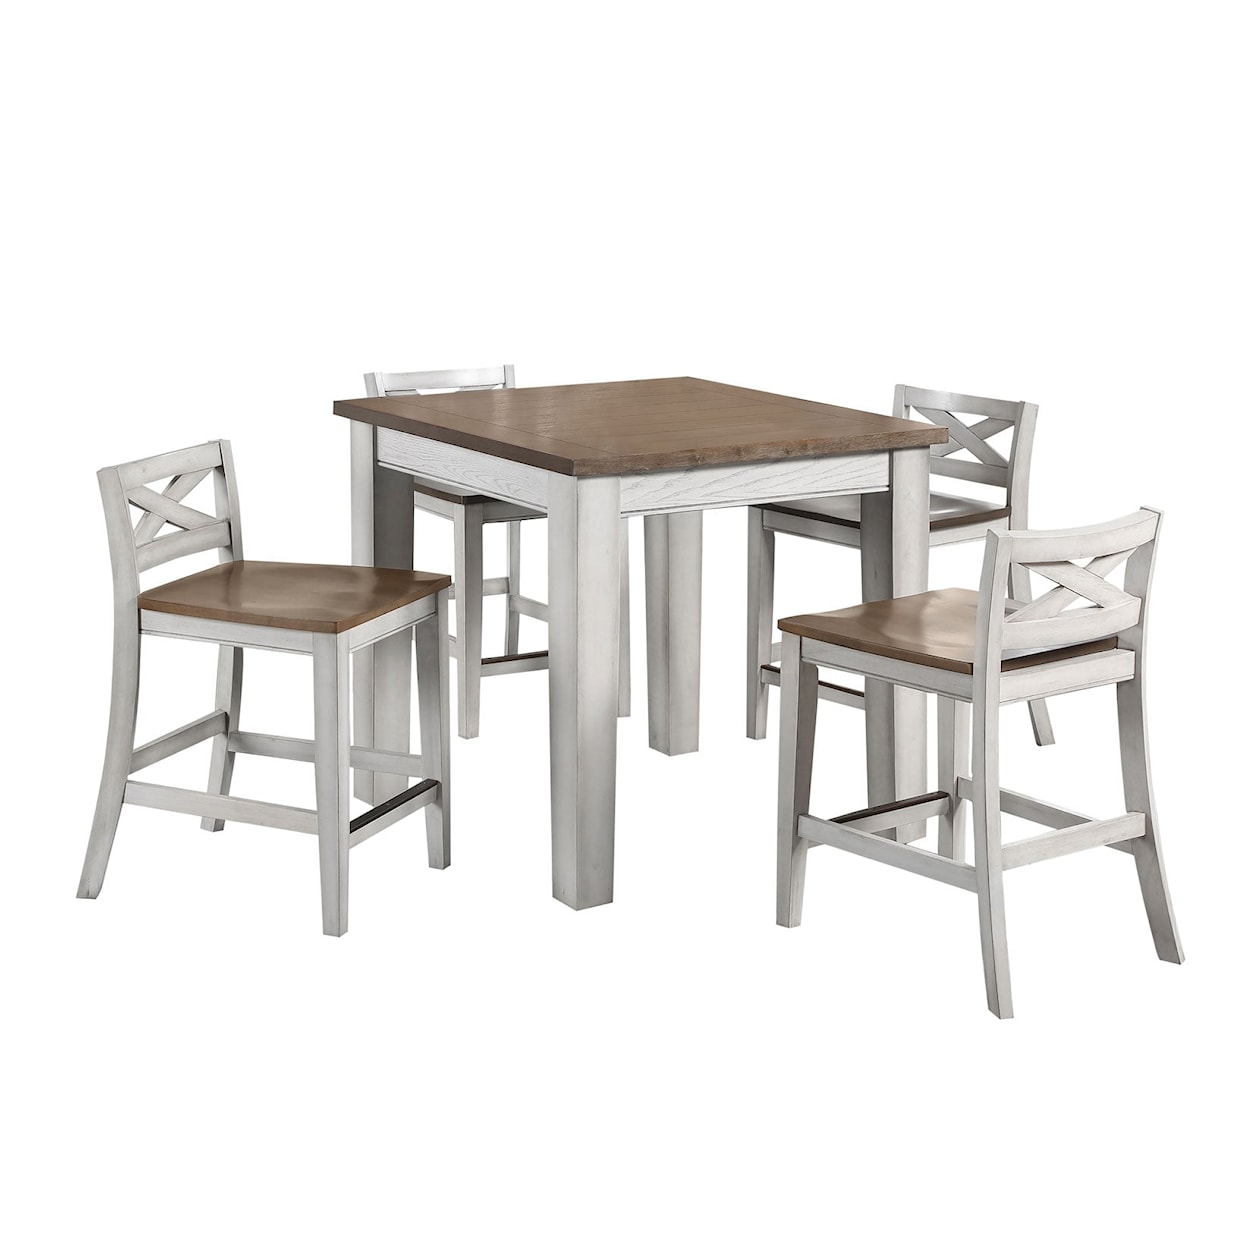 Steve Silver Lindale 5-Piece Counter Dining Set